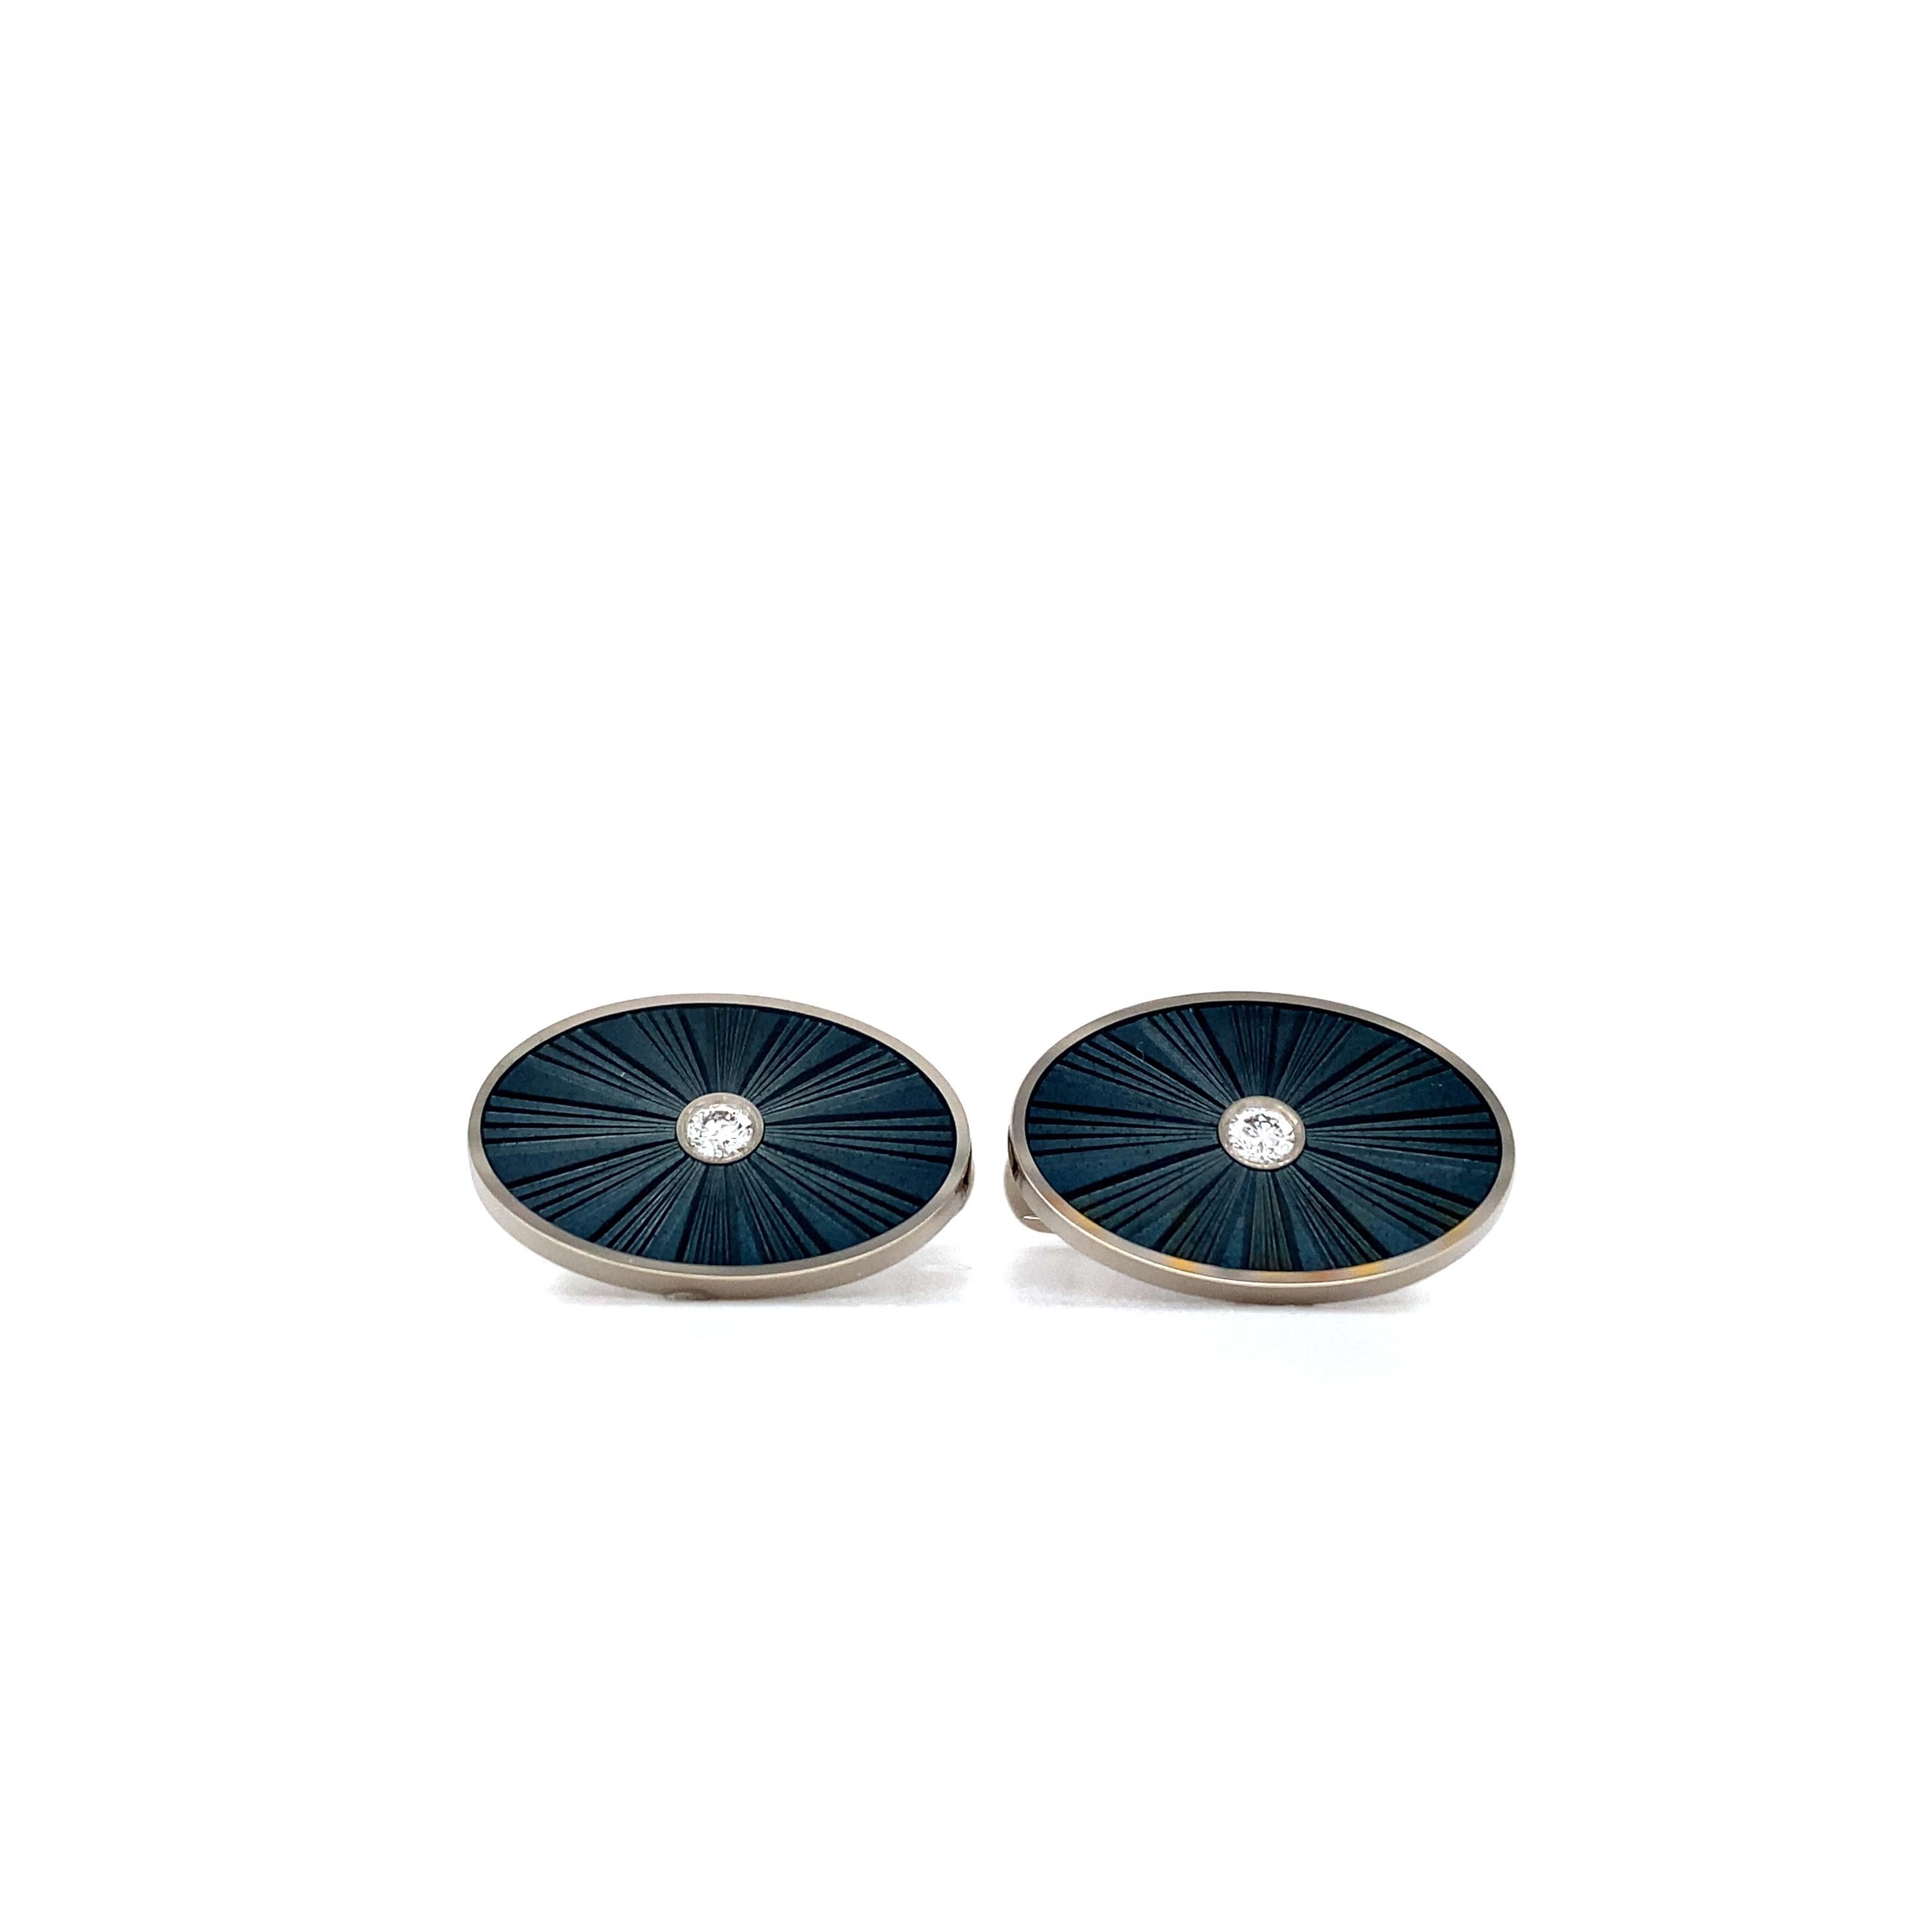 Victor Mayer oval cufflinks 18k white gold, falcon grey vitreous enamel, sunburst pattern guilloche, 2 brilliant cut diamonds, total 0.12 ct, G VS

About the creator Victor Mayer
Victor Mayer is internationally renowned for elegant timeless designs